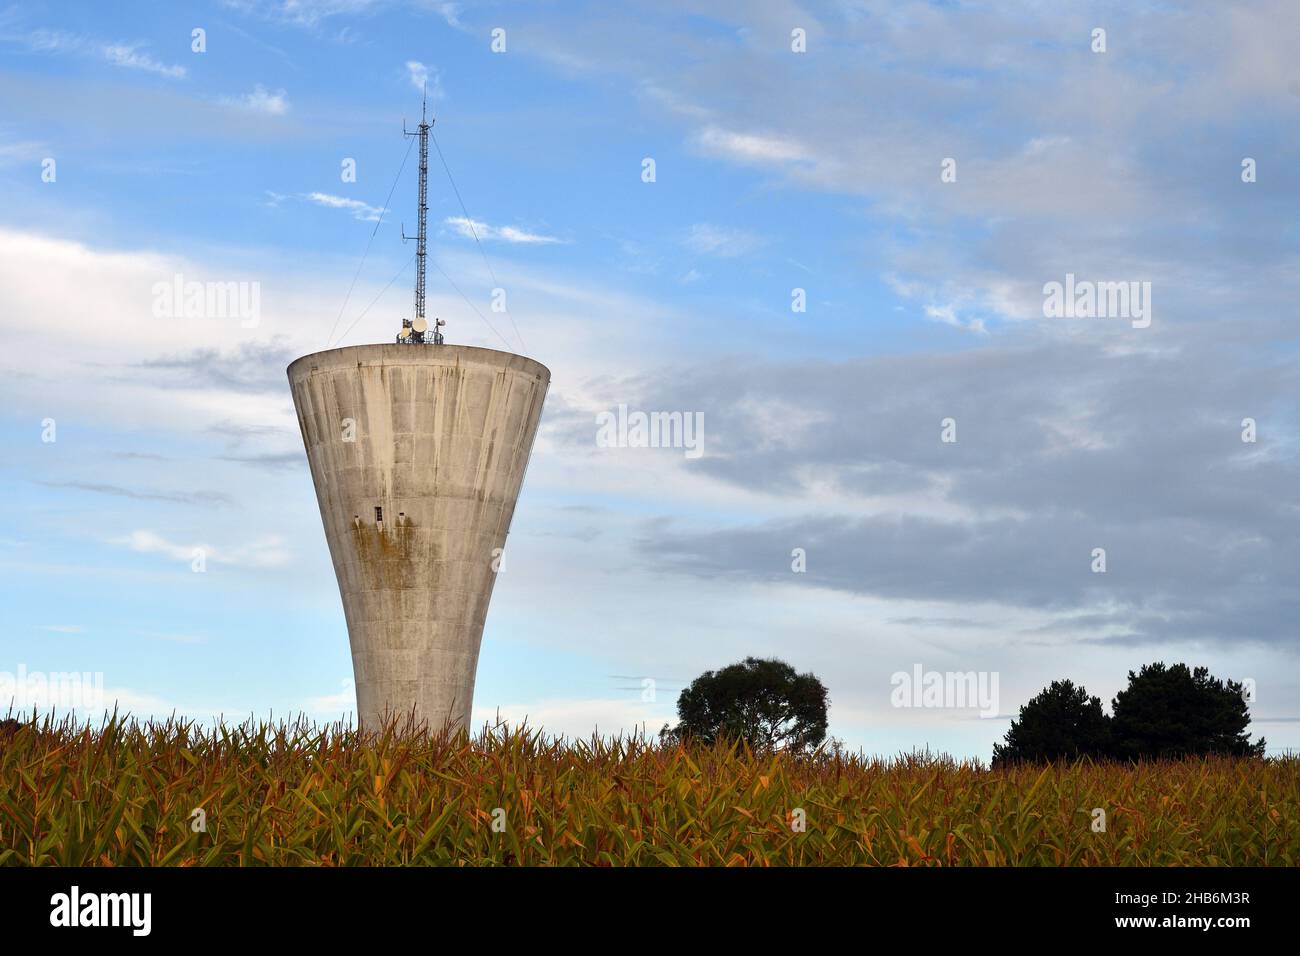 water tower with mast, France, Brittany, Departement Cotes-d’Armor, Erquy Stock Photo